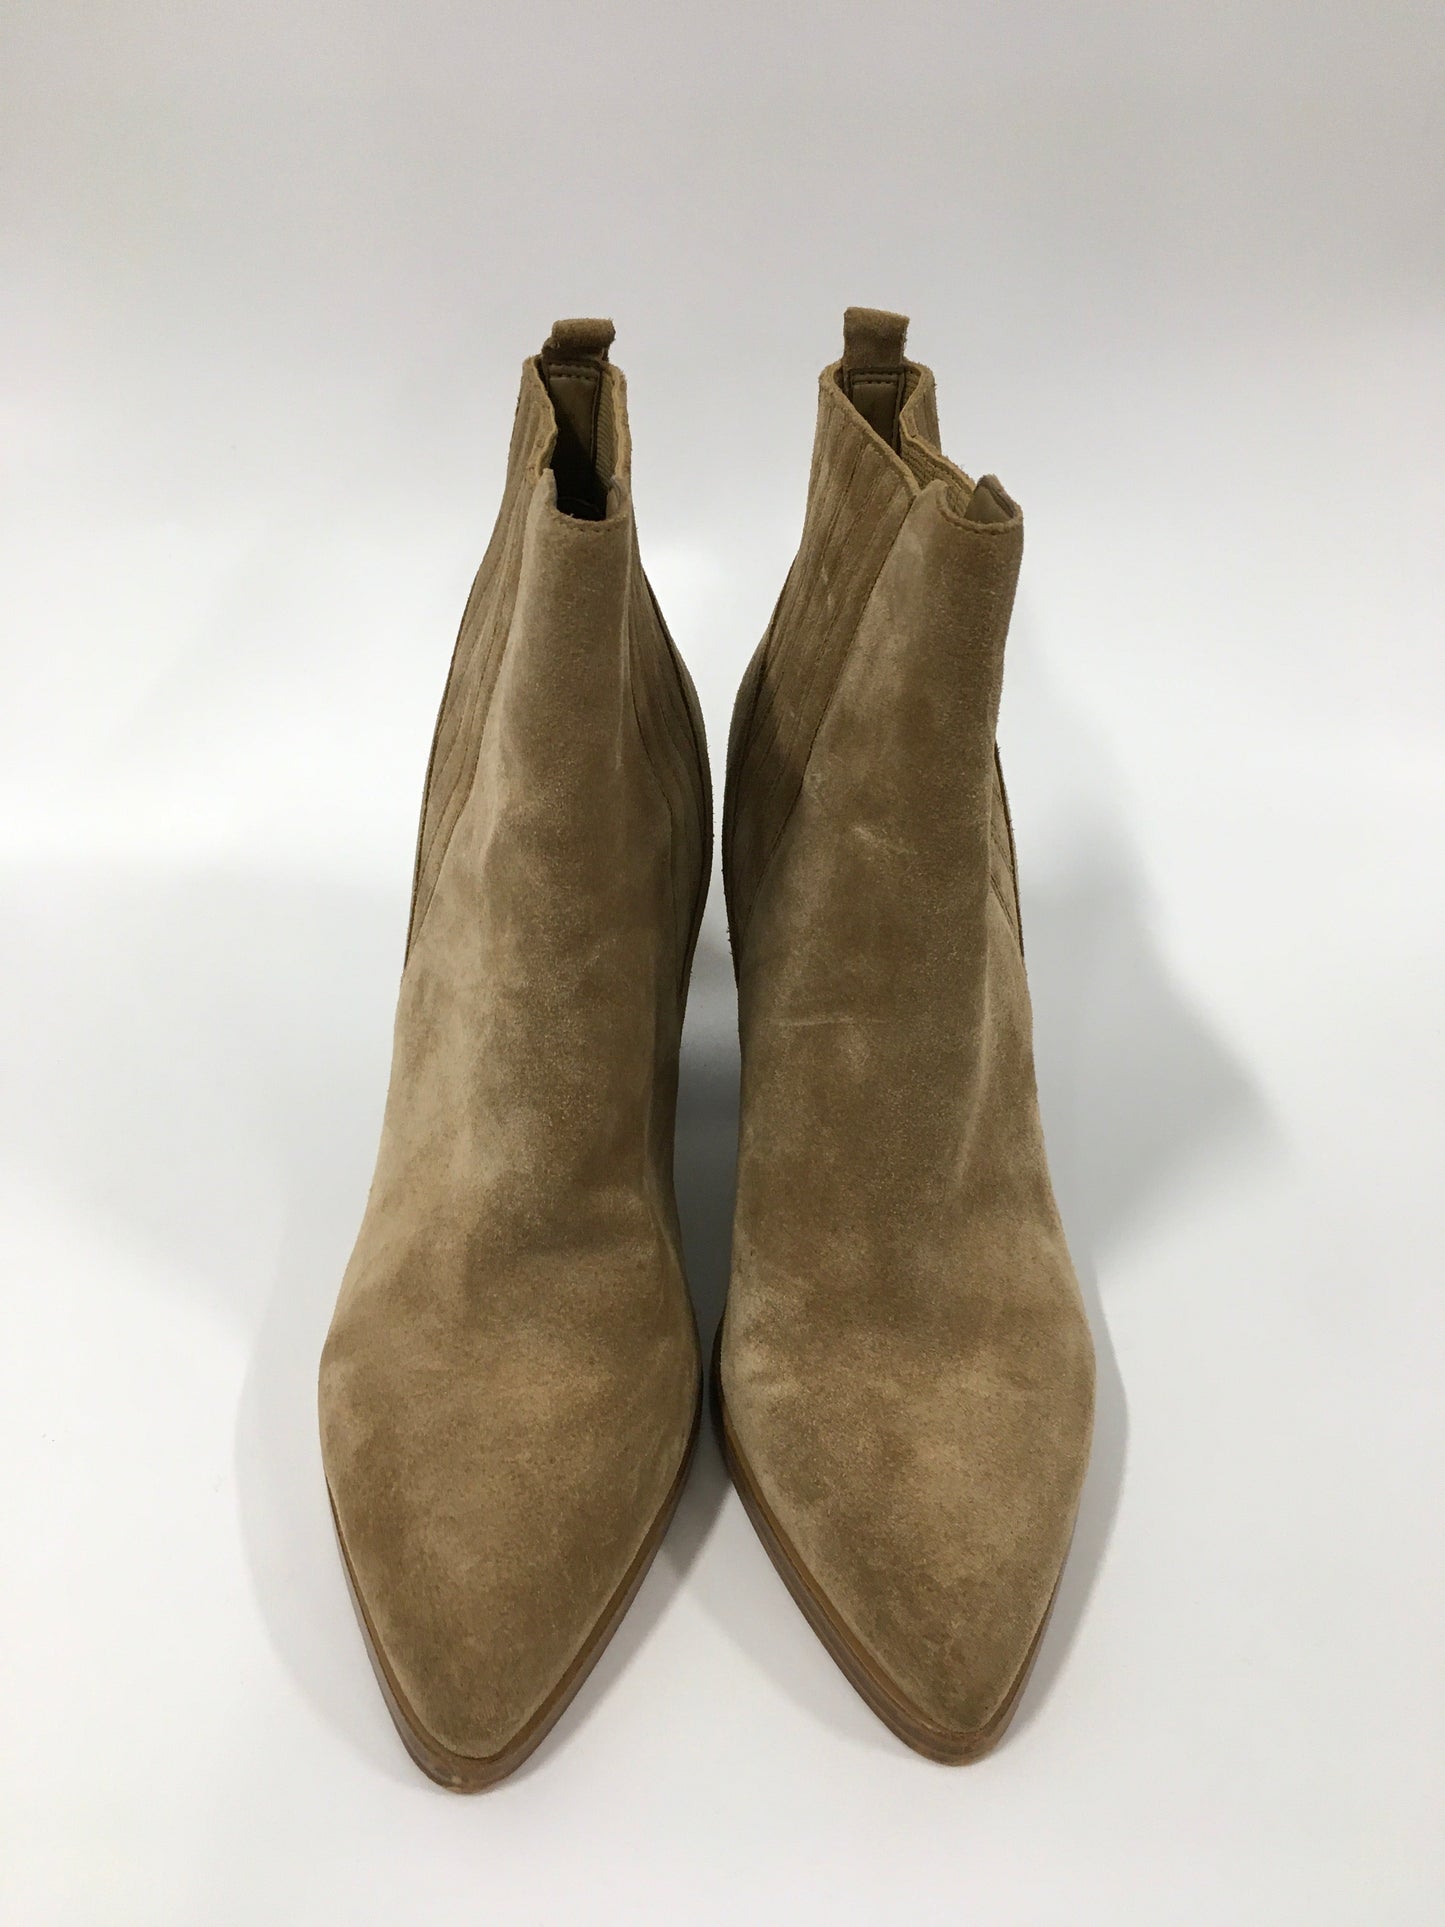 Tan Boots Ankle Heels Marc Fisher, Size 9.5